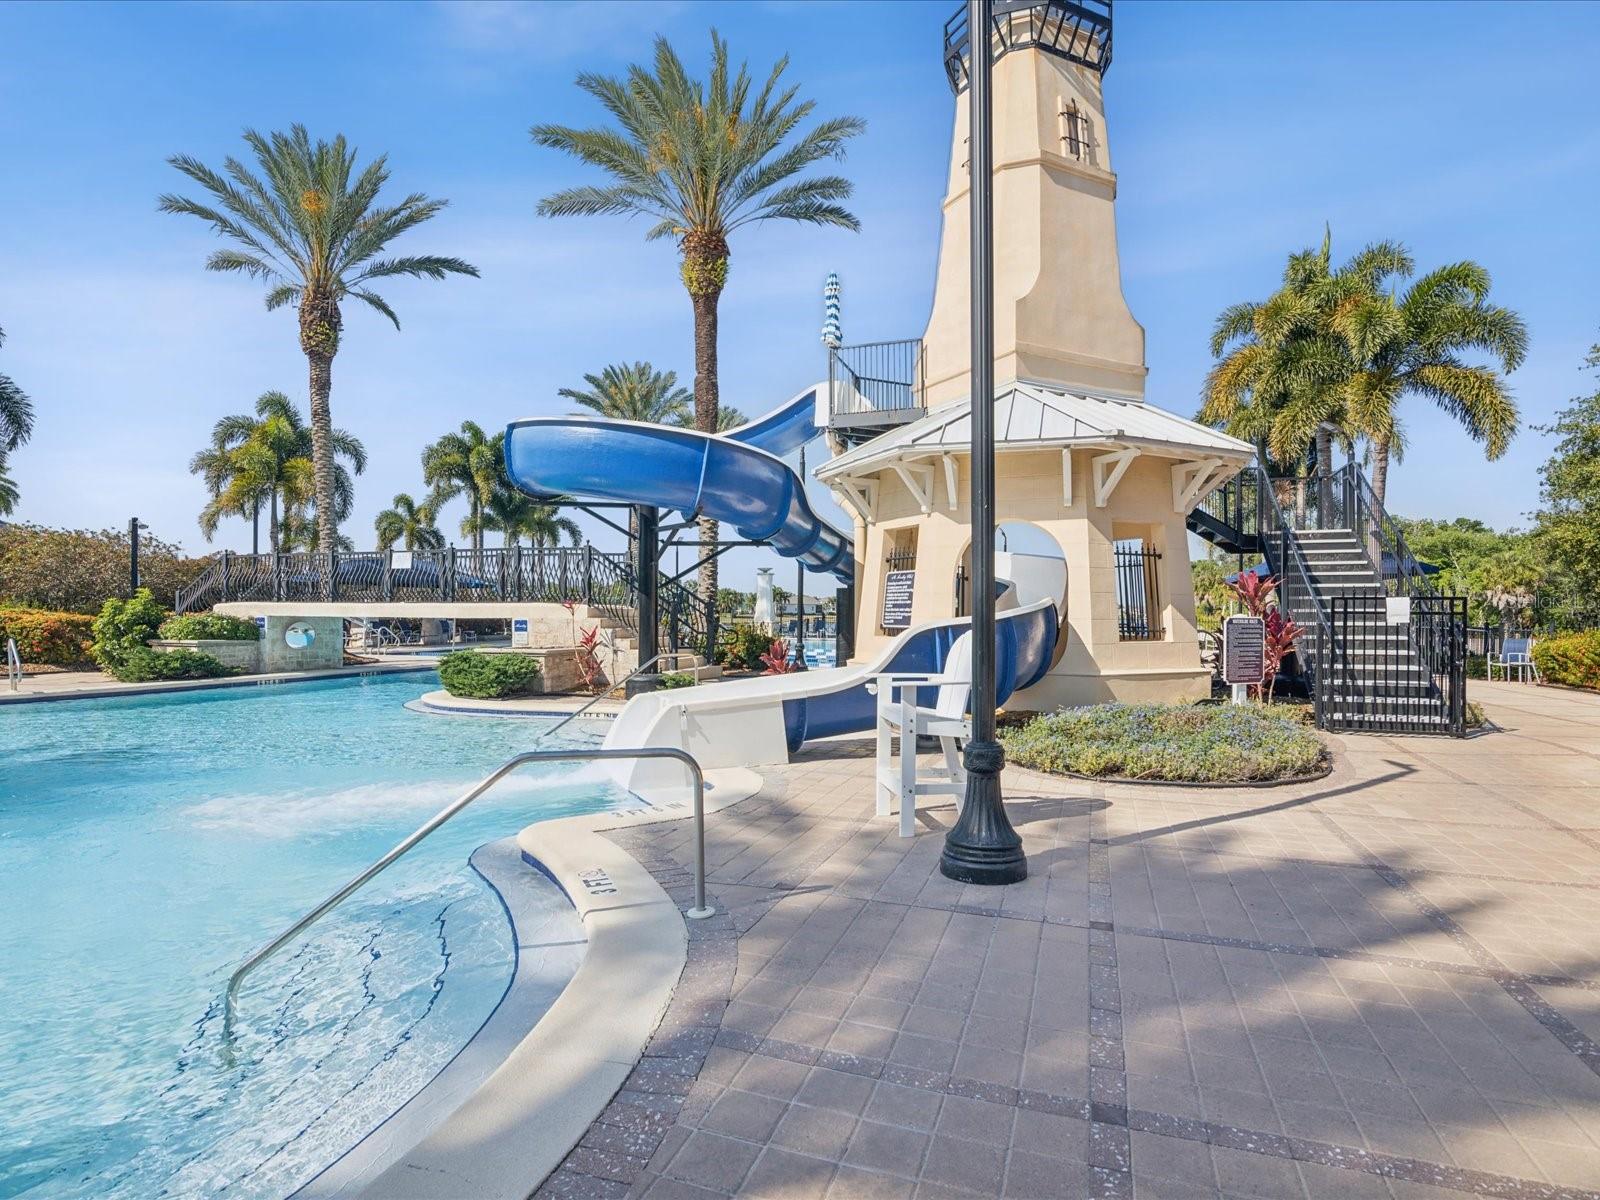 The resort style pool provides various water features to entertain adults and children alike.